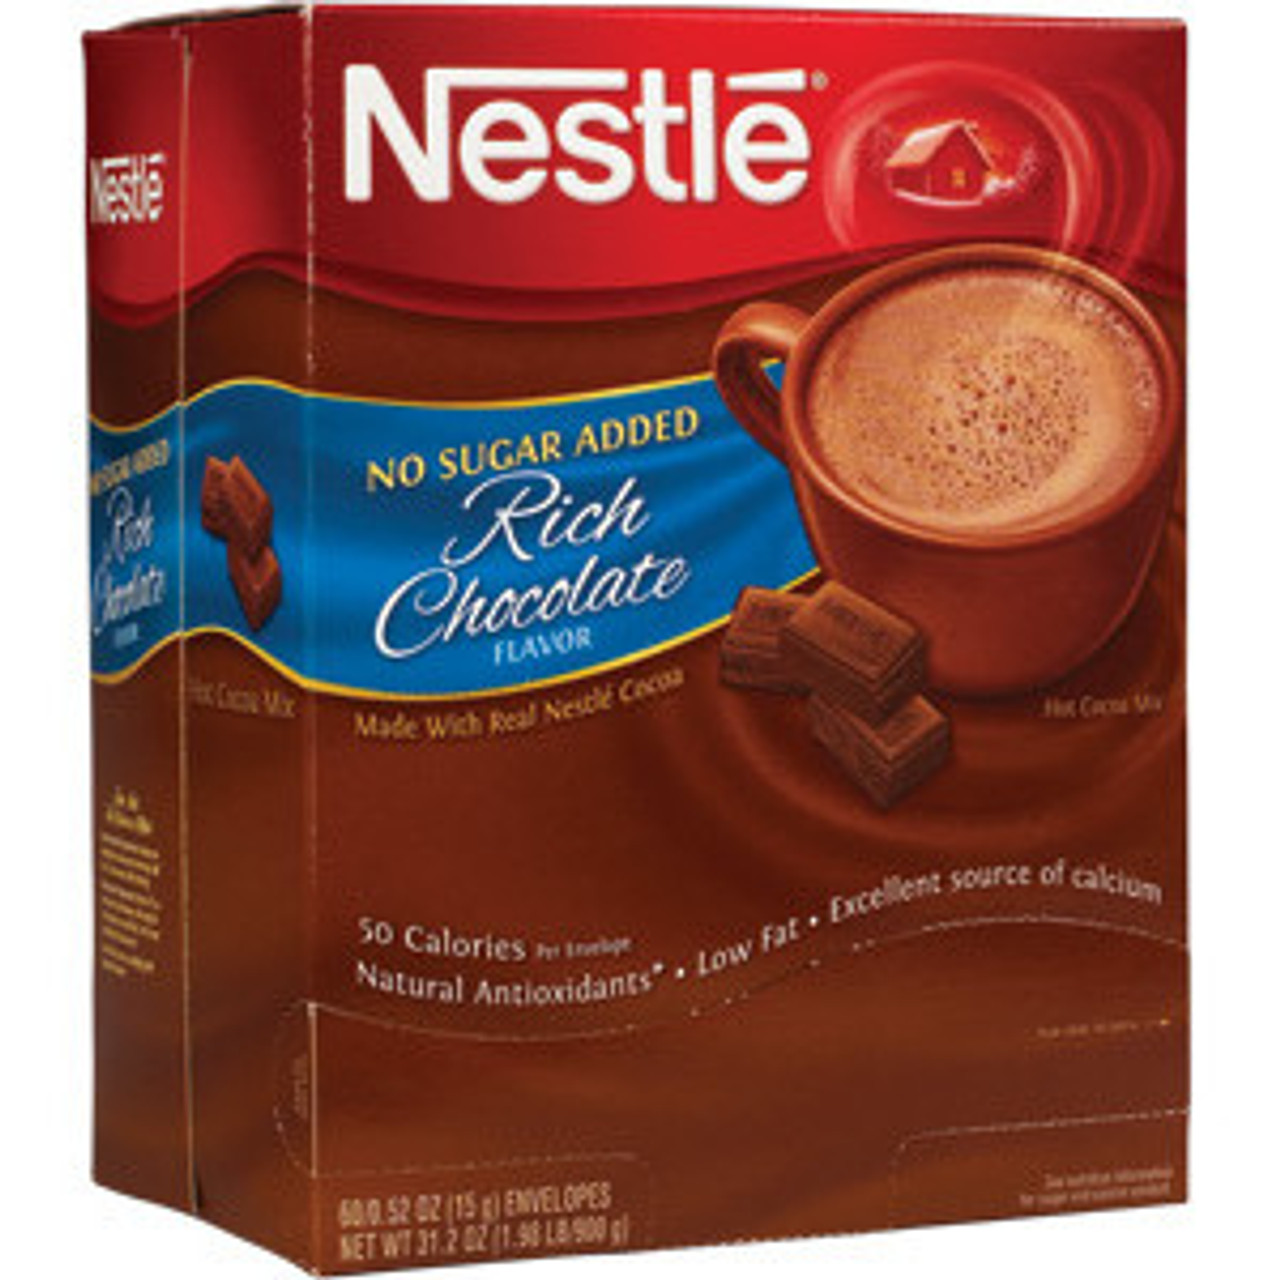 Nestlé® Hot Cocoa, Coffee and Beverages